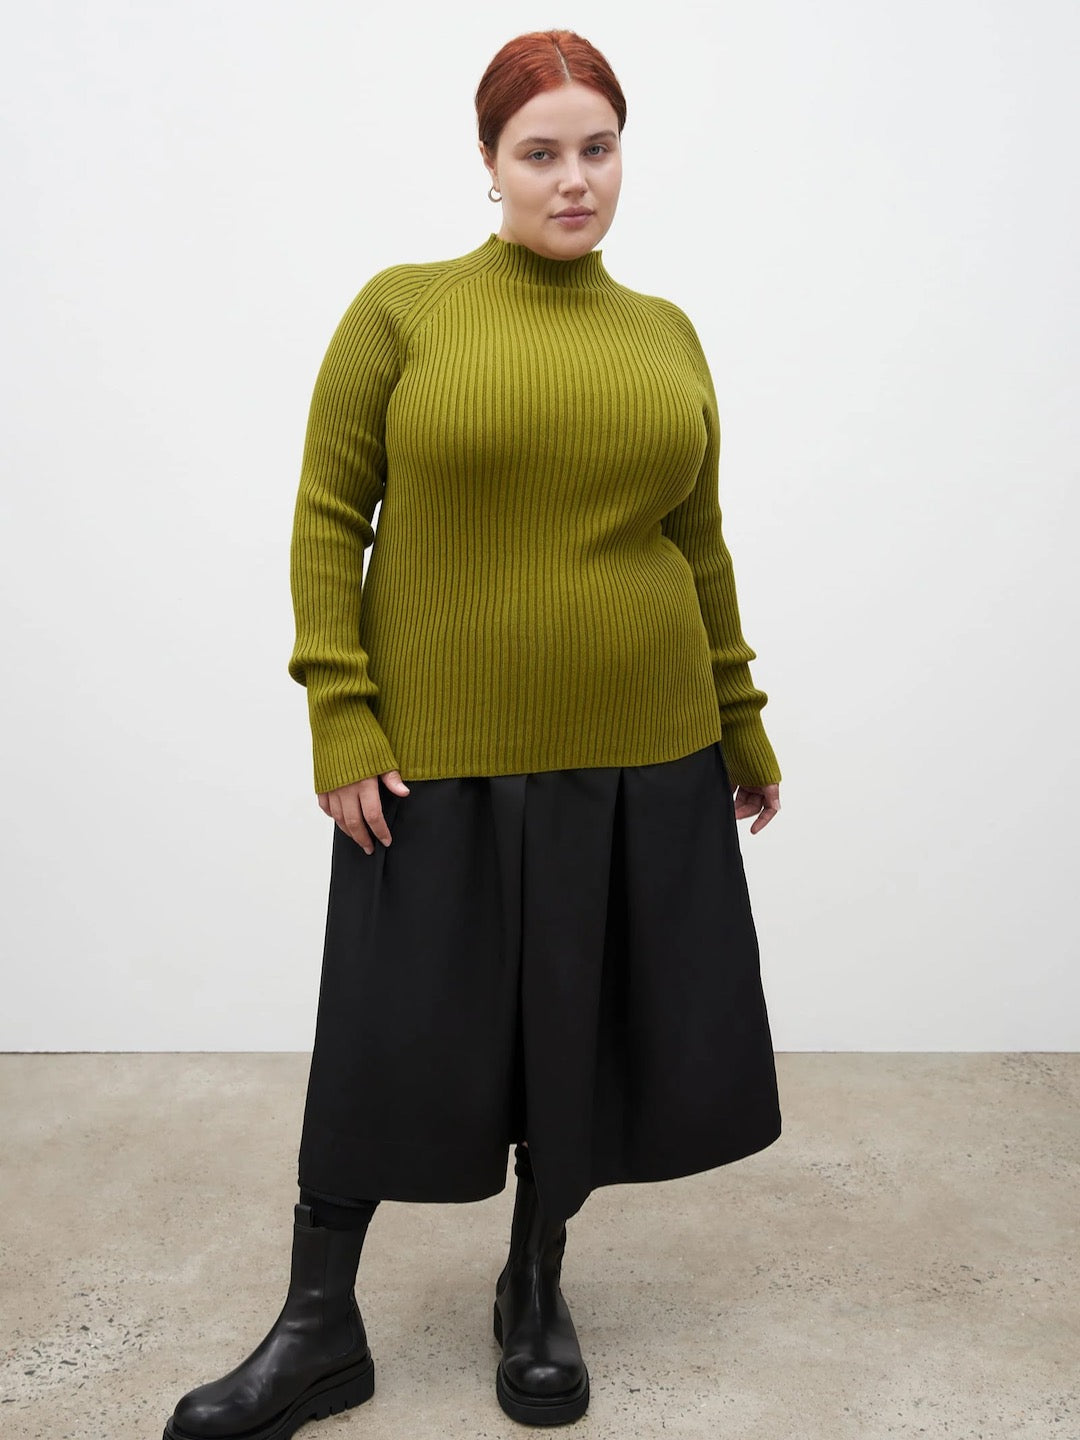 A woman wearing a green Row Top - Lawn turtleneck sweater and black skirt. (Brand Name: Kowtow)